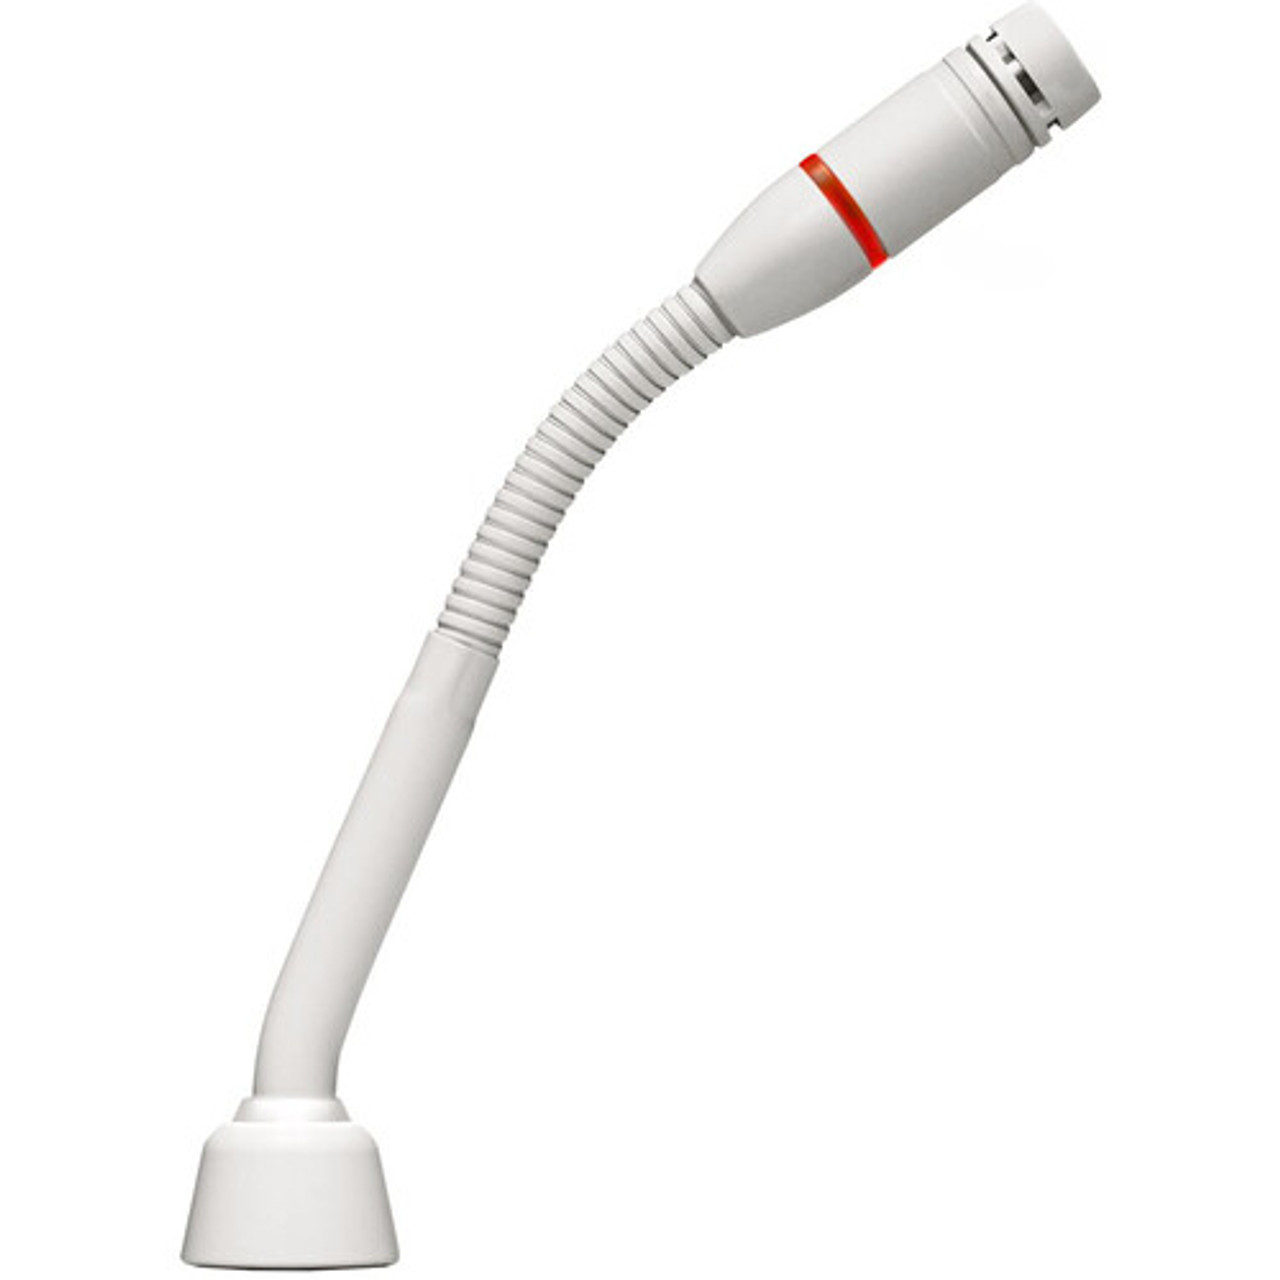 Shure MX405WRLP/C-VBDL Shock-Mounted Gooseneck Mic with Cardioid Capsule, No Preamp, and Red LED Ring on Top (White) (MX405WRLP/C-VBDL)